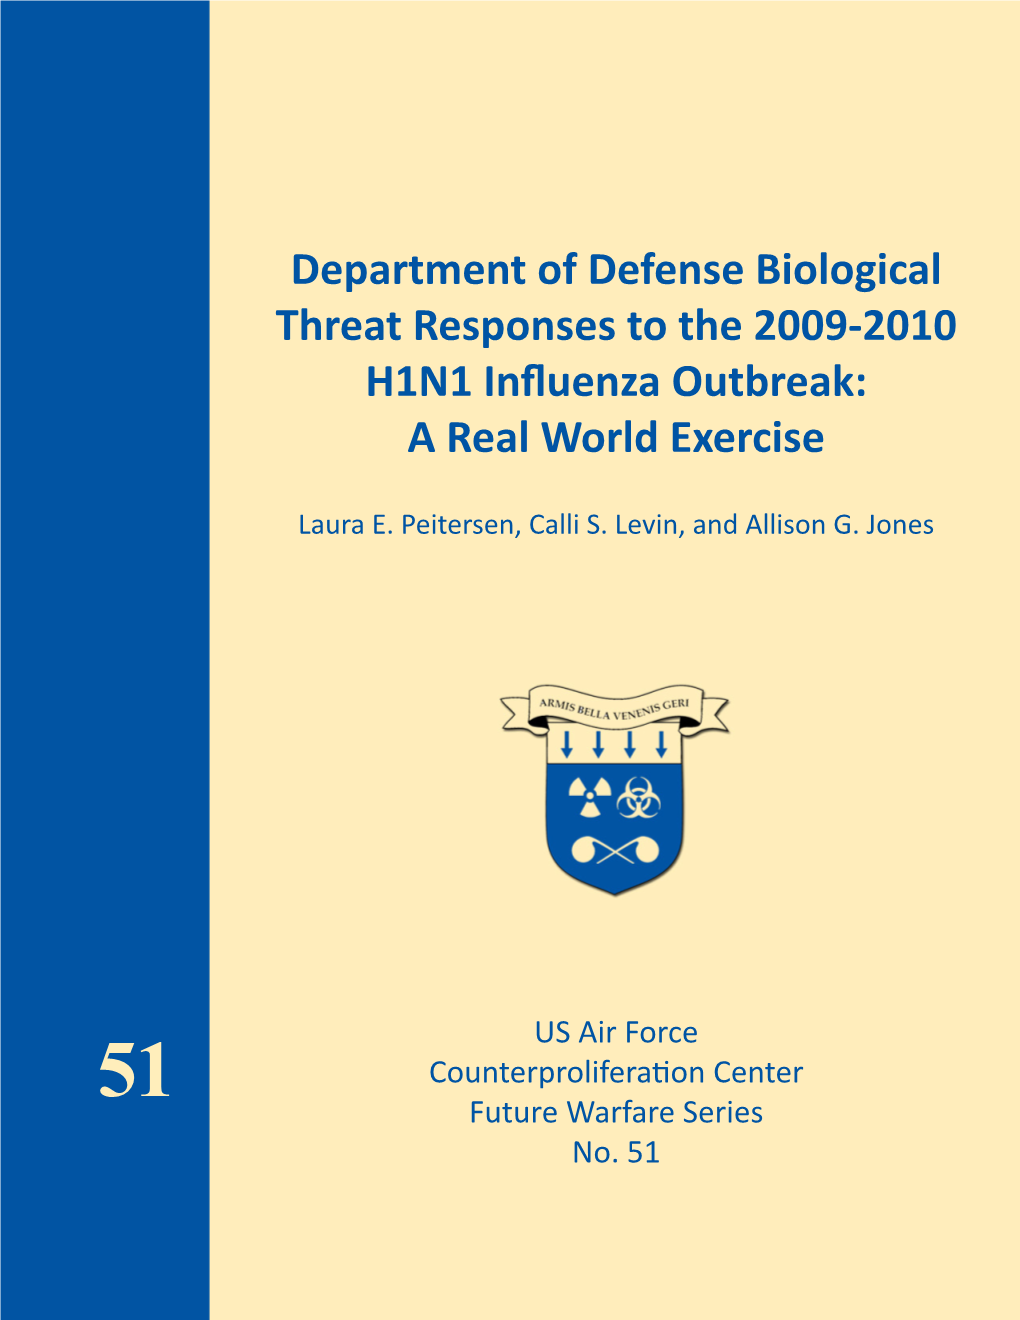 Department of Defense Responses to 2009-2010 H1N1 Influenza Outbreak